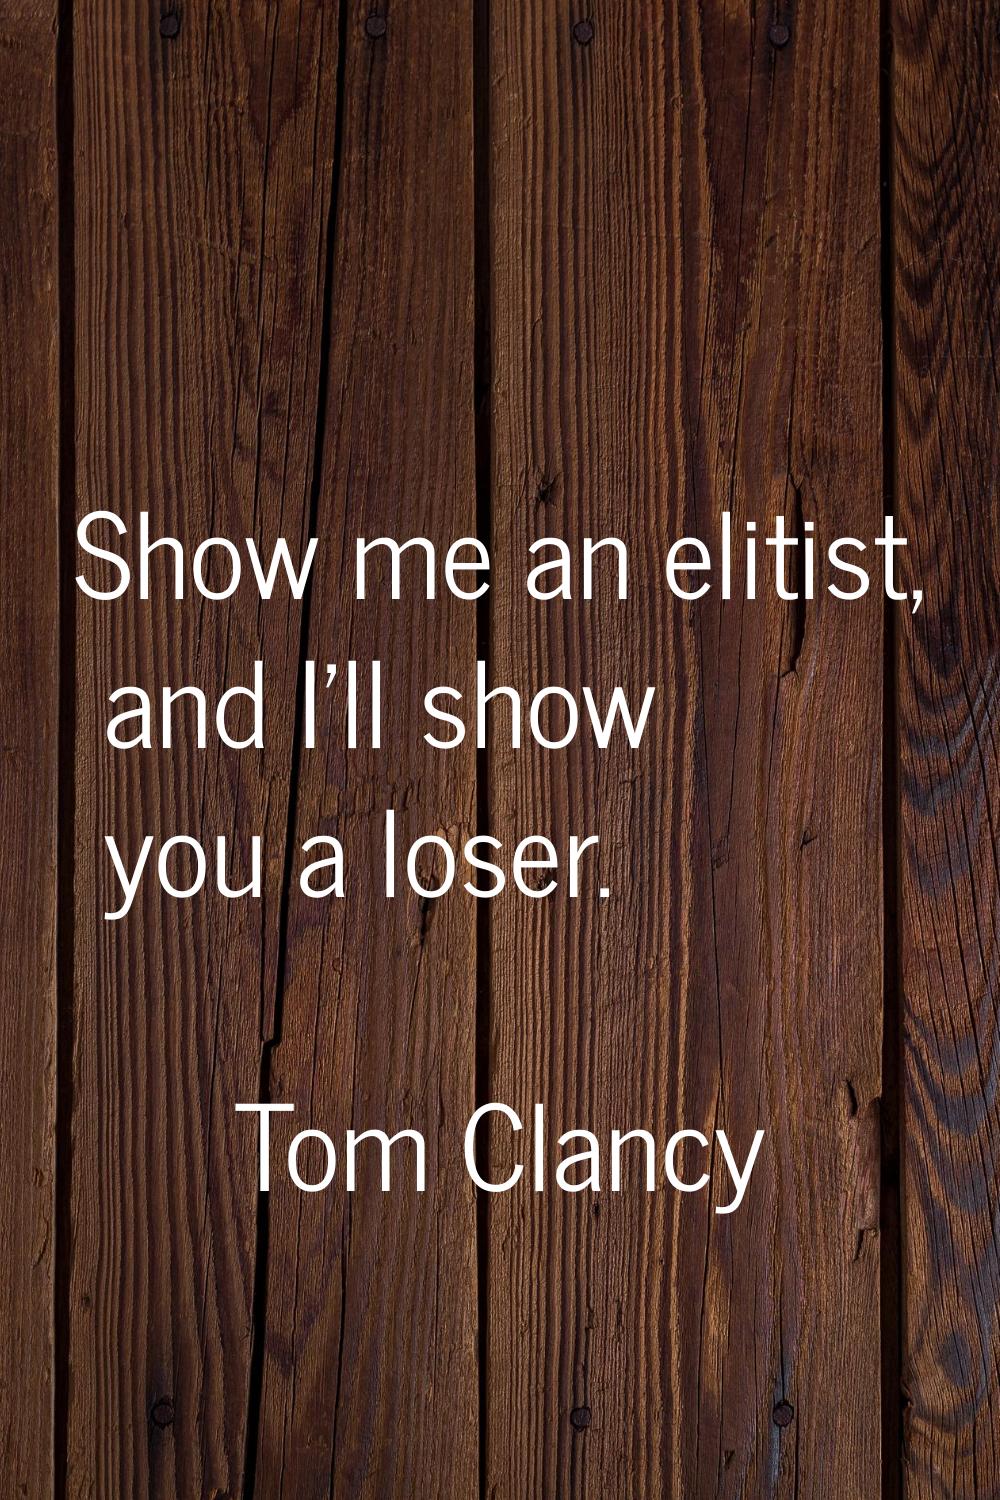 Show me an elitist, and I'll show you a loser.